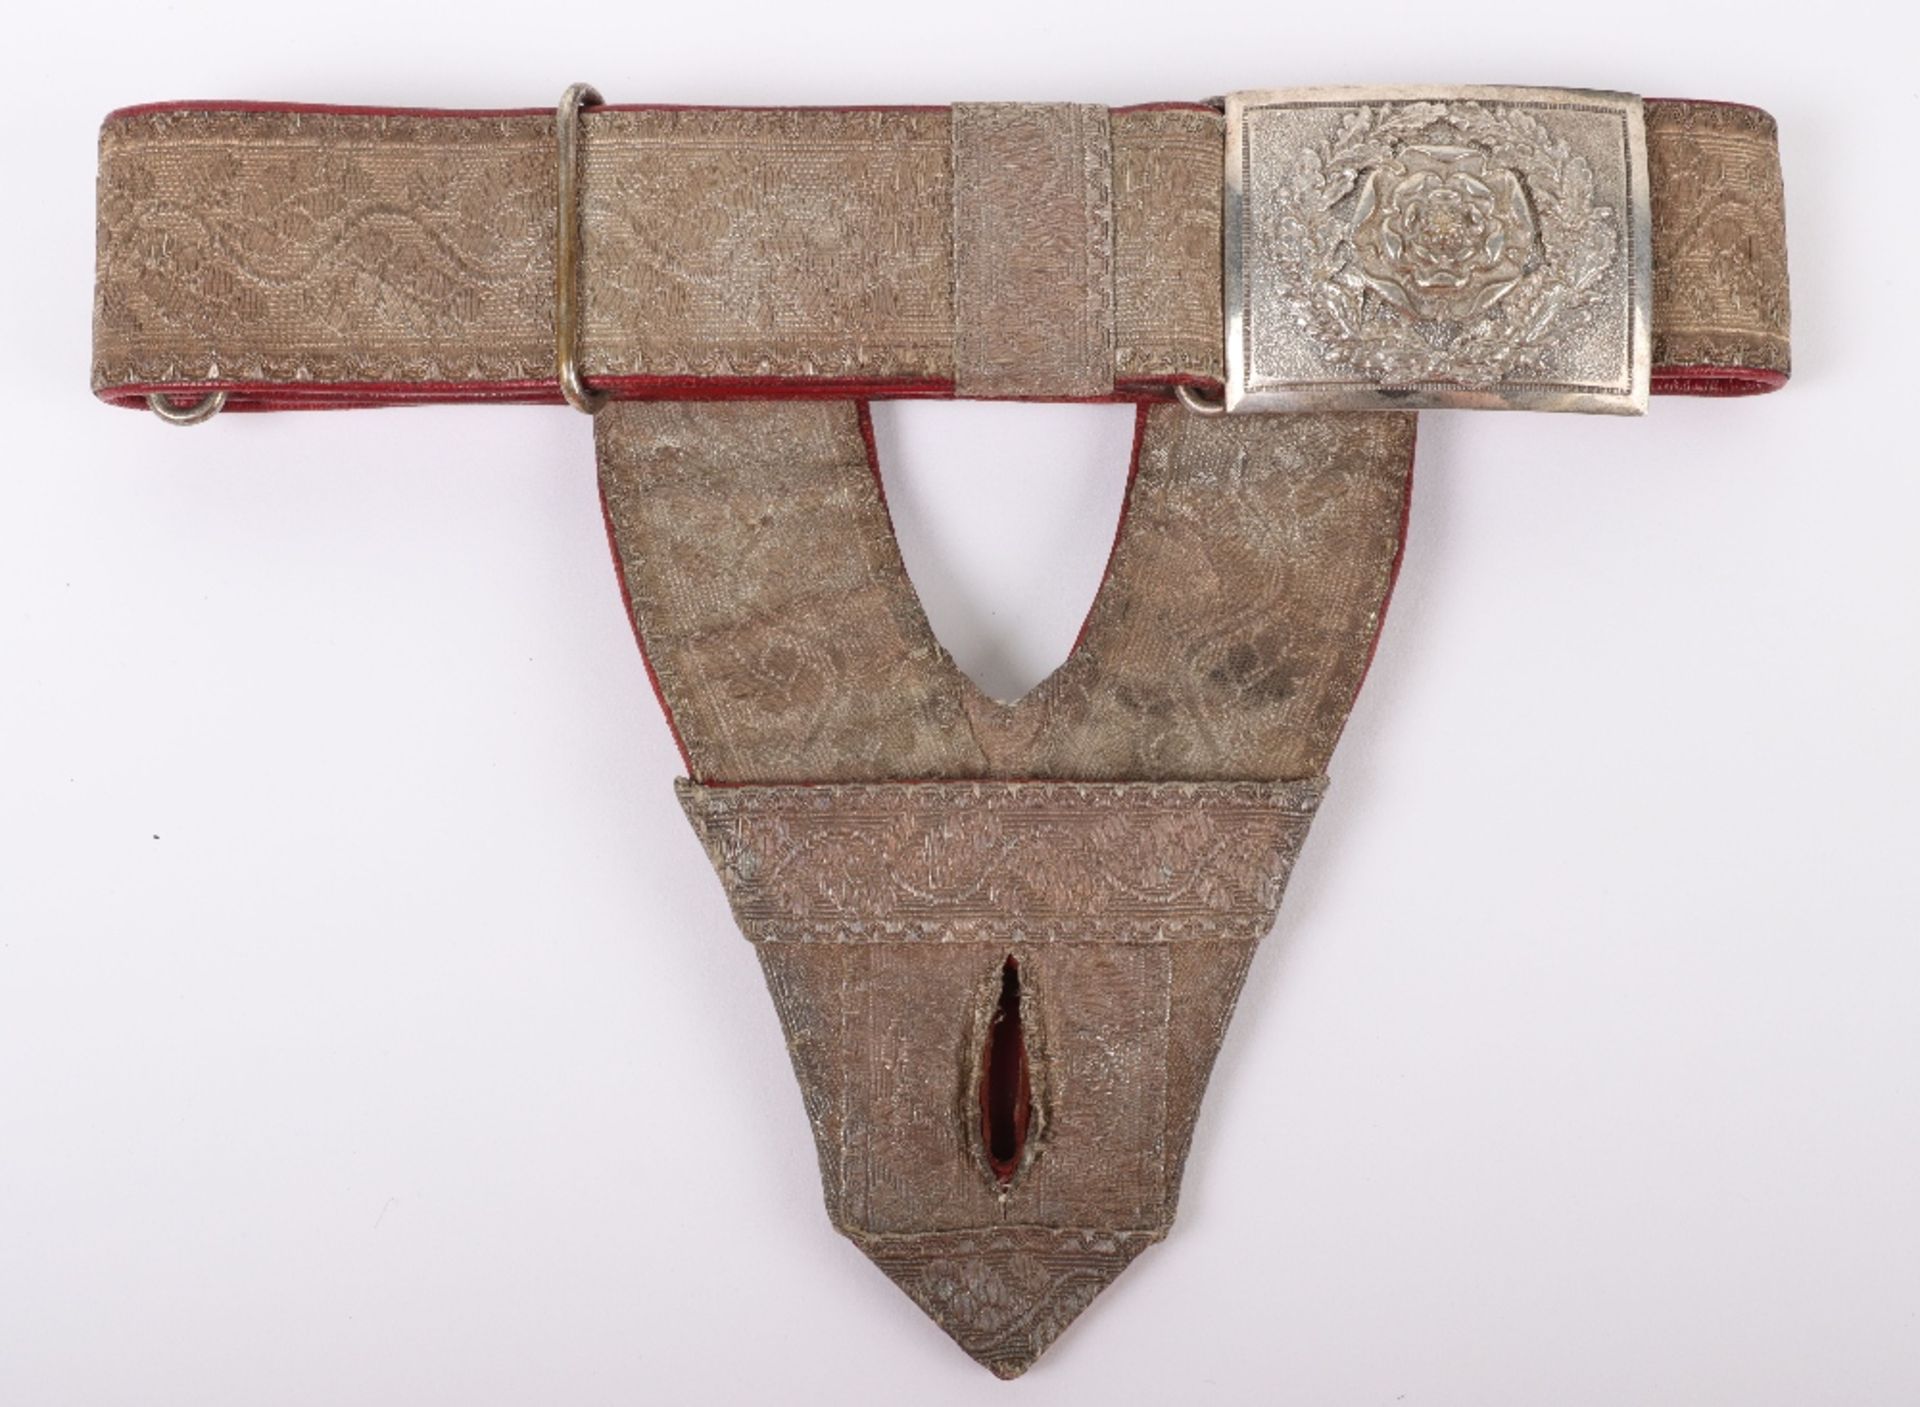 Edward 7th Courtsword, Embroidered Belt & Hanger, Cased Epaulettes for a Lord Lieutenant of an Engli - Image 30 of 38